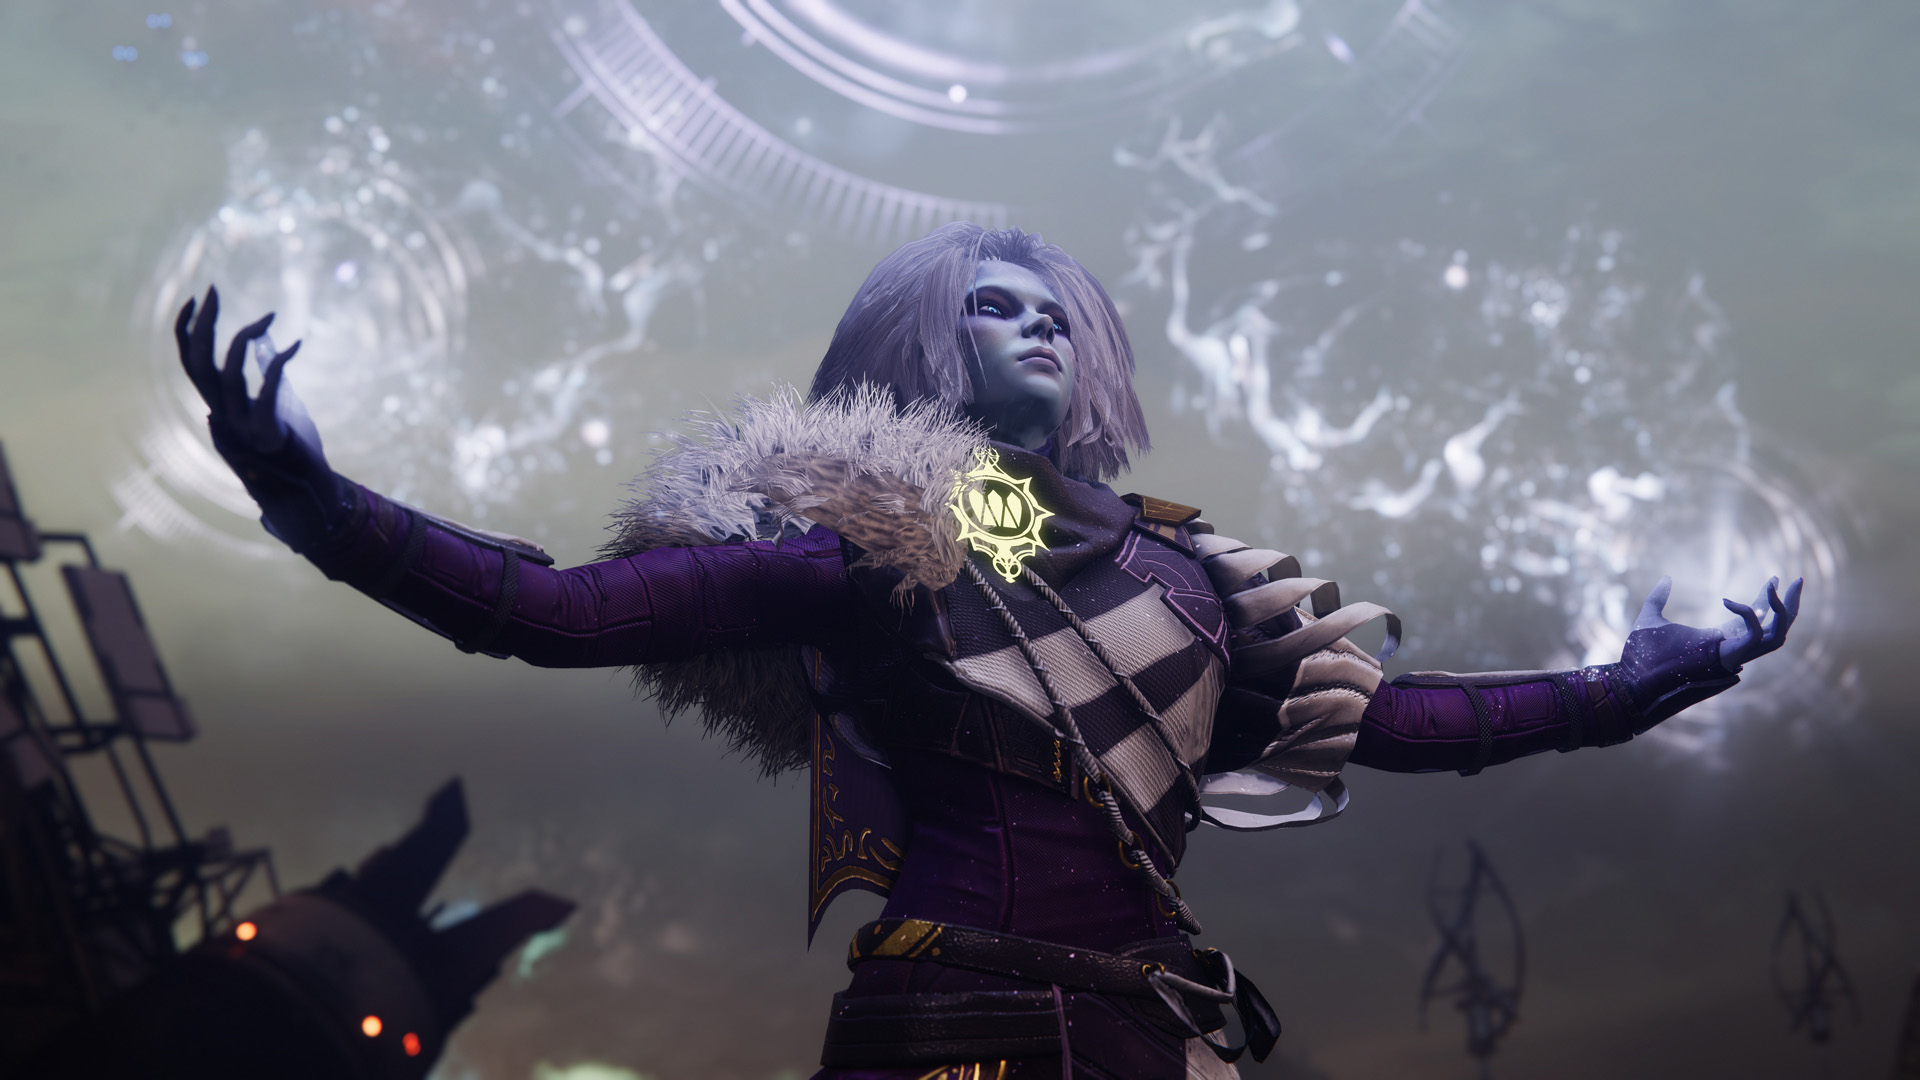 Destiny 2 Lightfall difficulty changes are putting players off